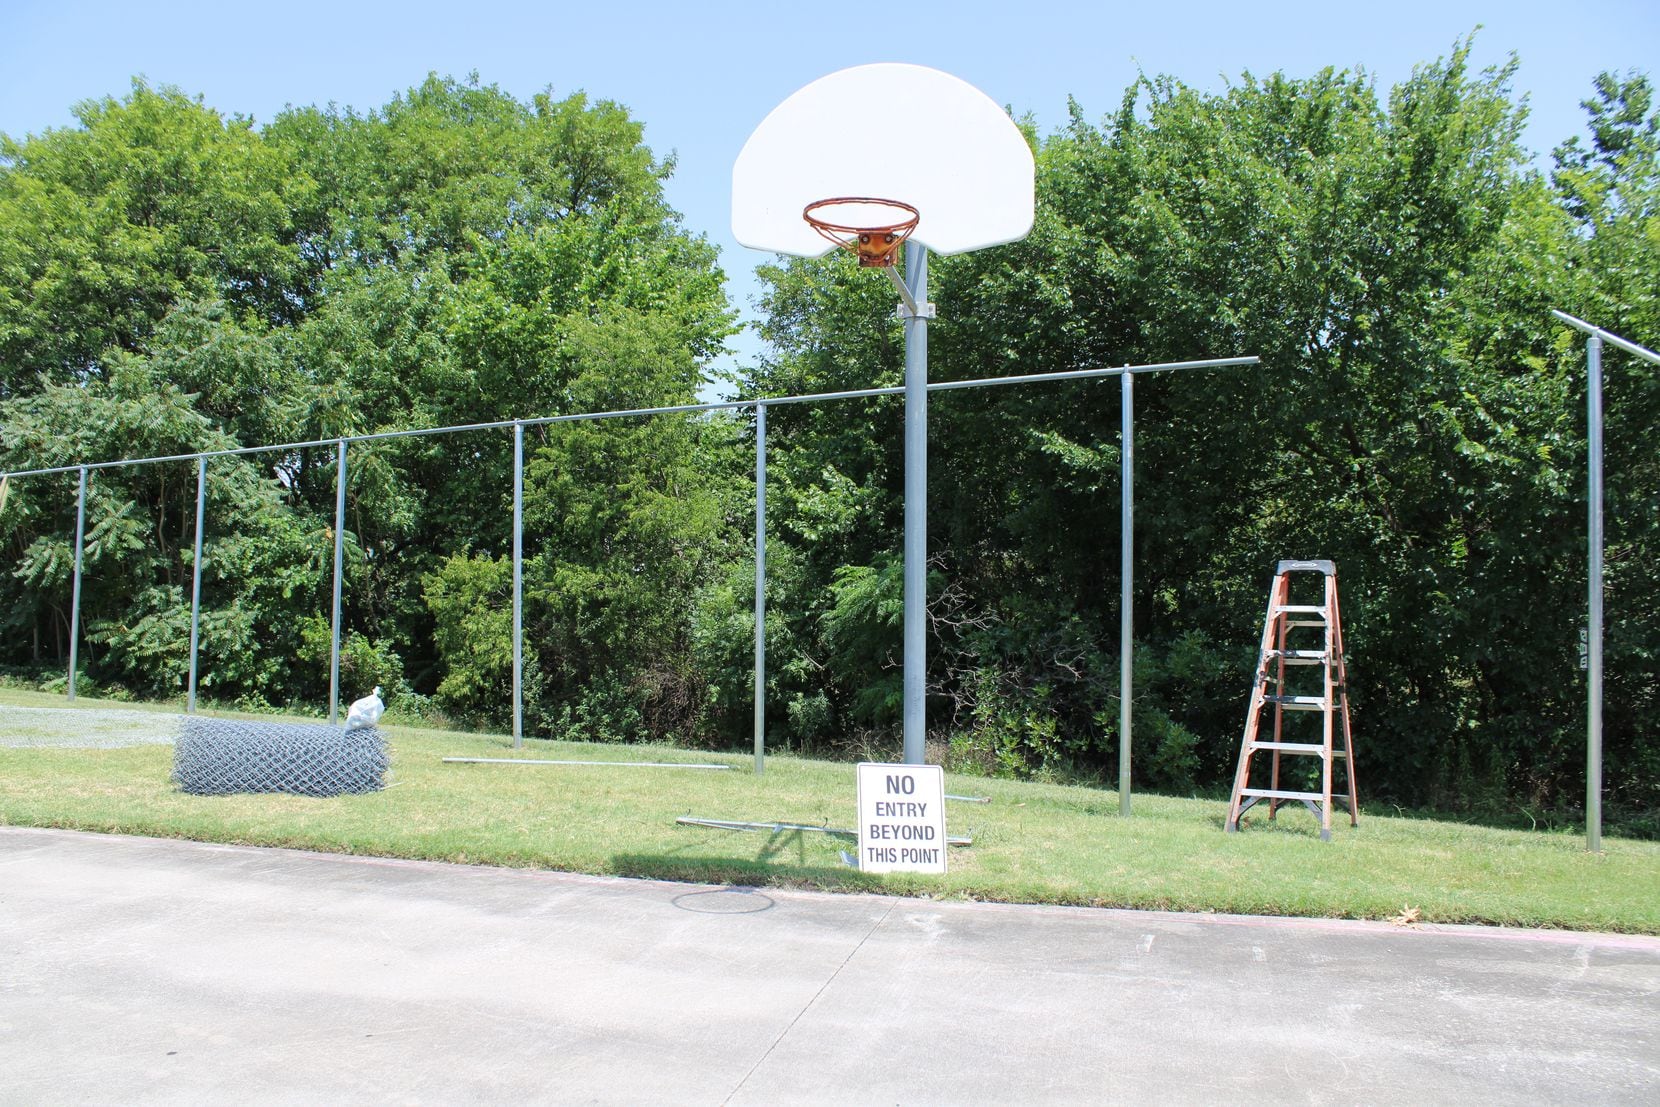 A company placed fencing behind a basketball court at Park Crest Elementary School on July 24. (Sophie Austin/The Dallas Morning News)